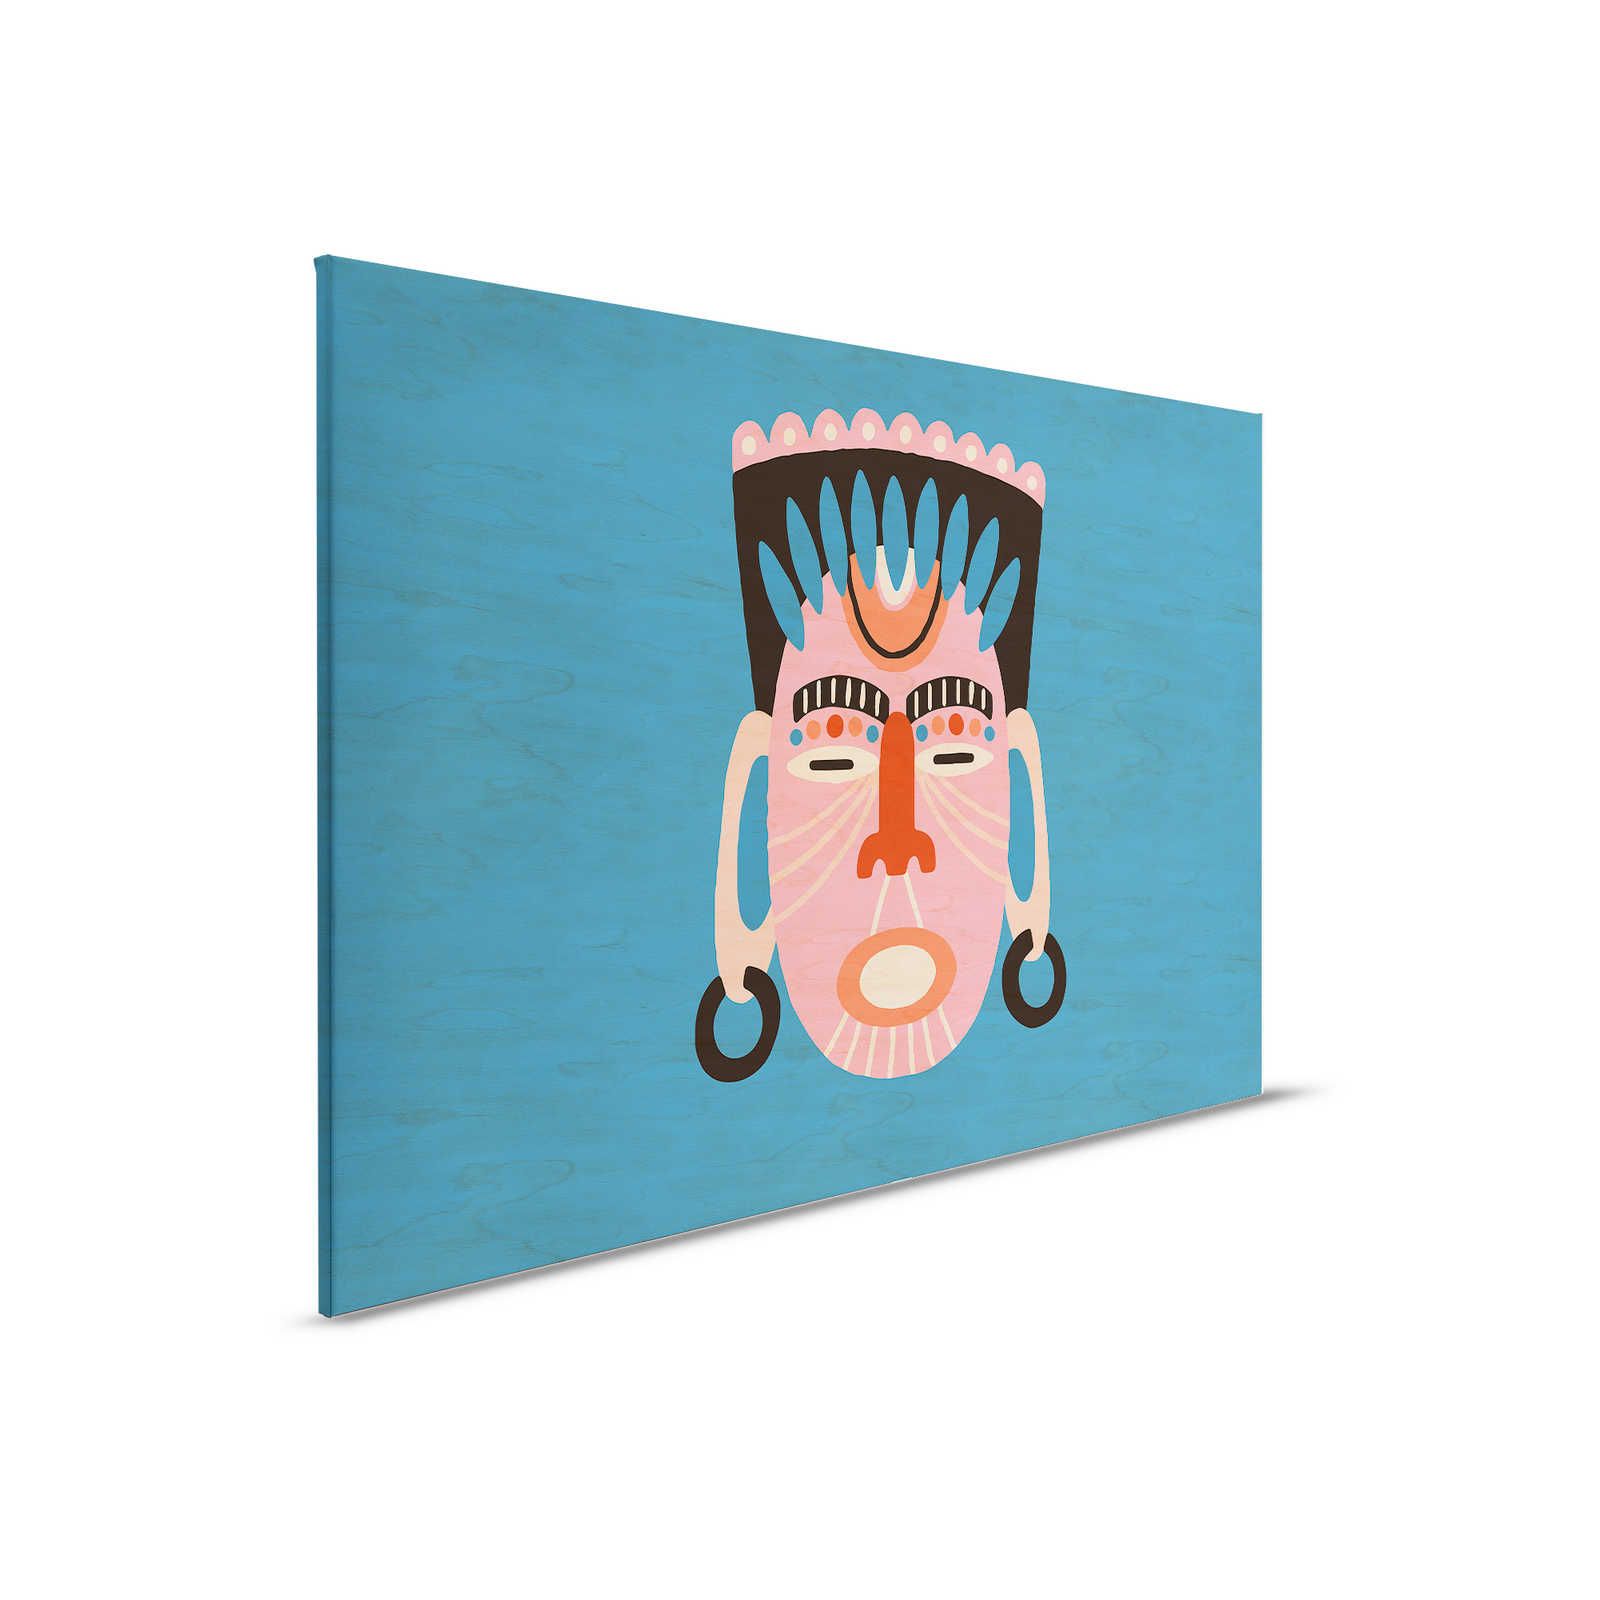         Overseas 3 - Blue canvas painting Ethno Design with mask - 0,90 m x 0,60 m
    